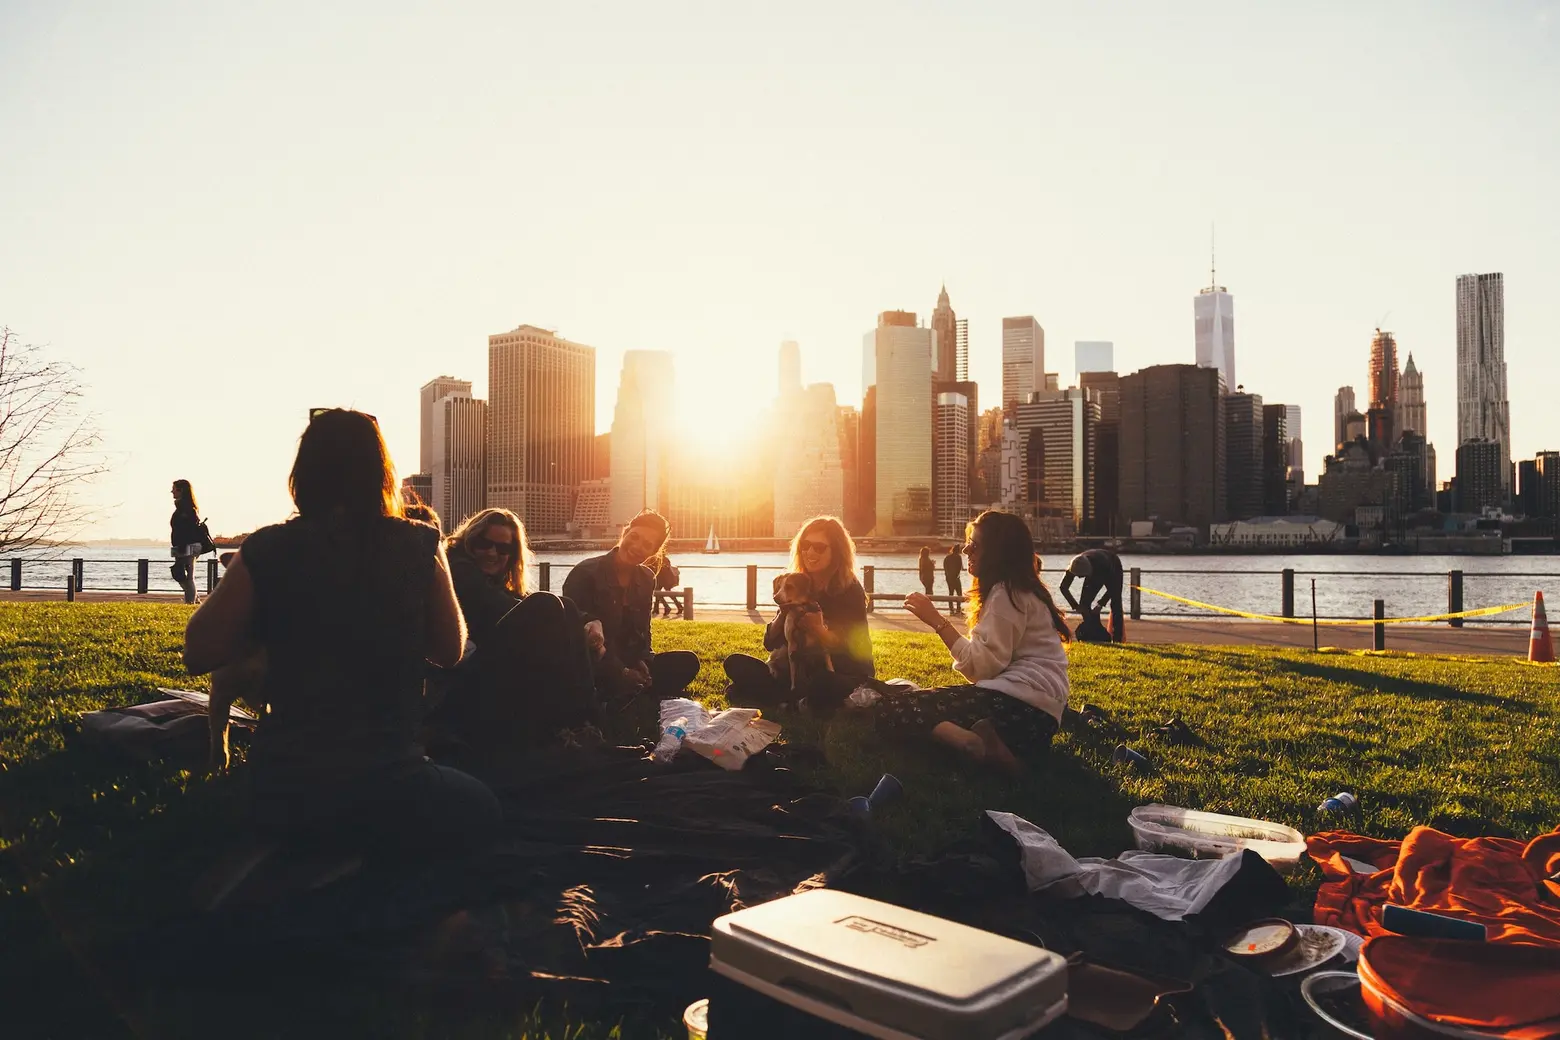 12 things you need for the perfect picnic in NYC